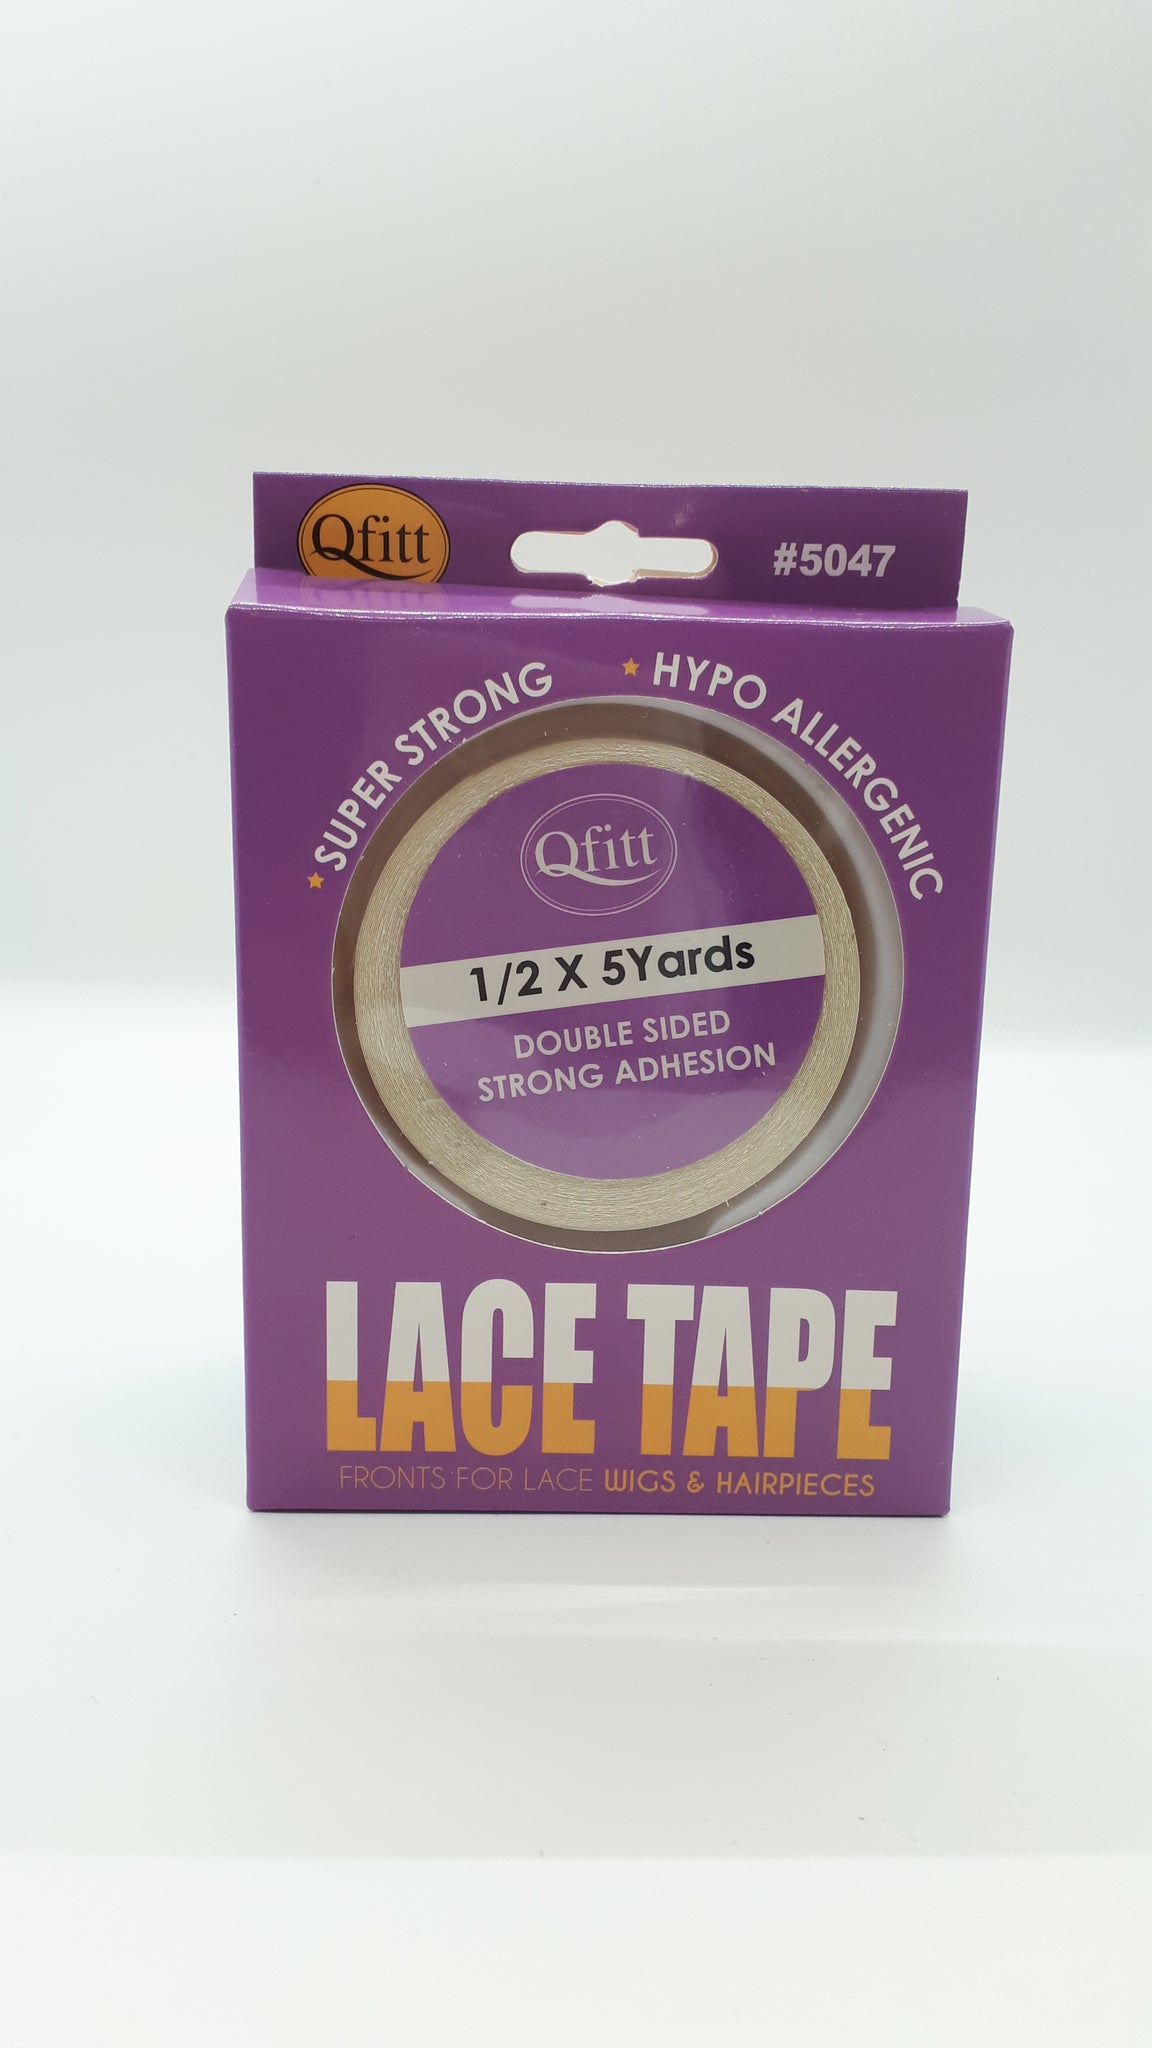 Lace Tape for Wigs & Hairpieces 1/2 x 5 Yards Double Sided Strong Adhesive